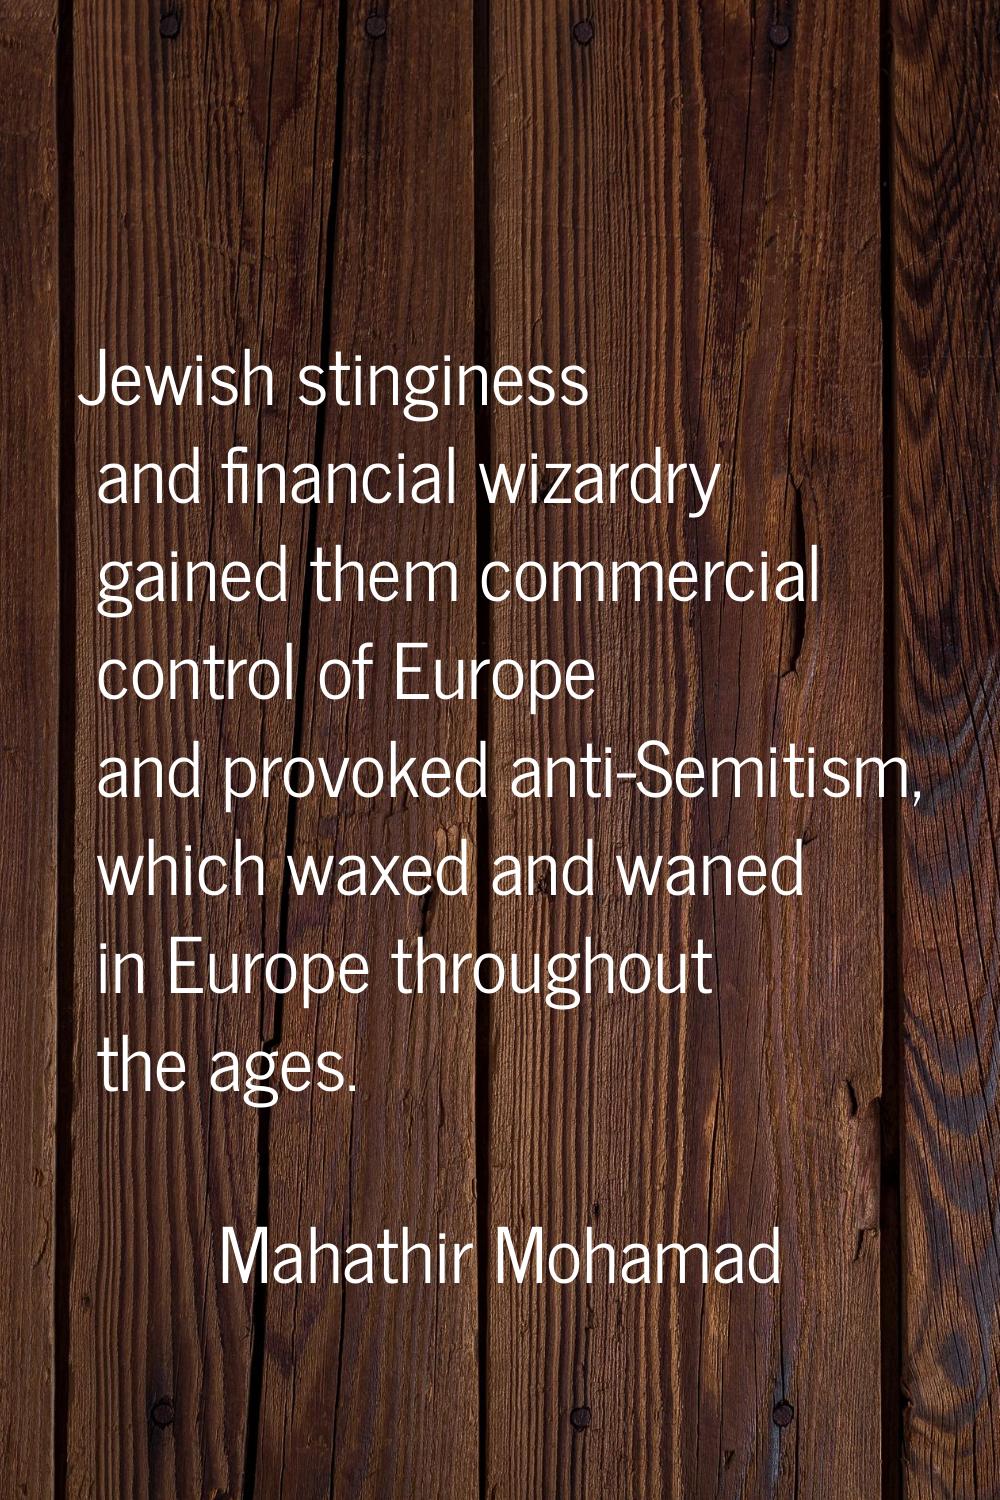 Jewish stinginess and financial wizardry gained them commercial control of Europe and provoked anti